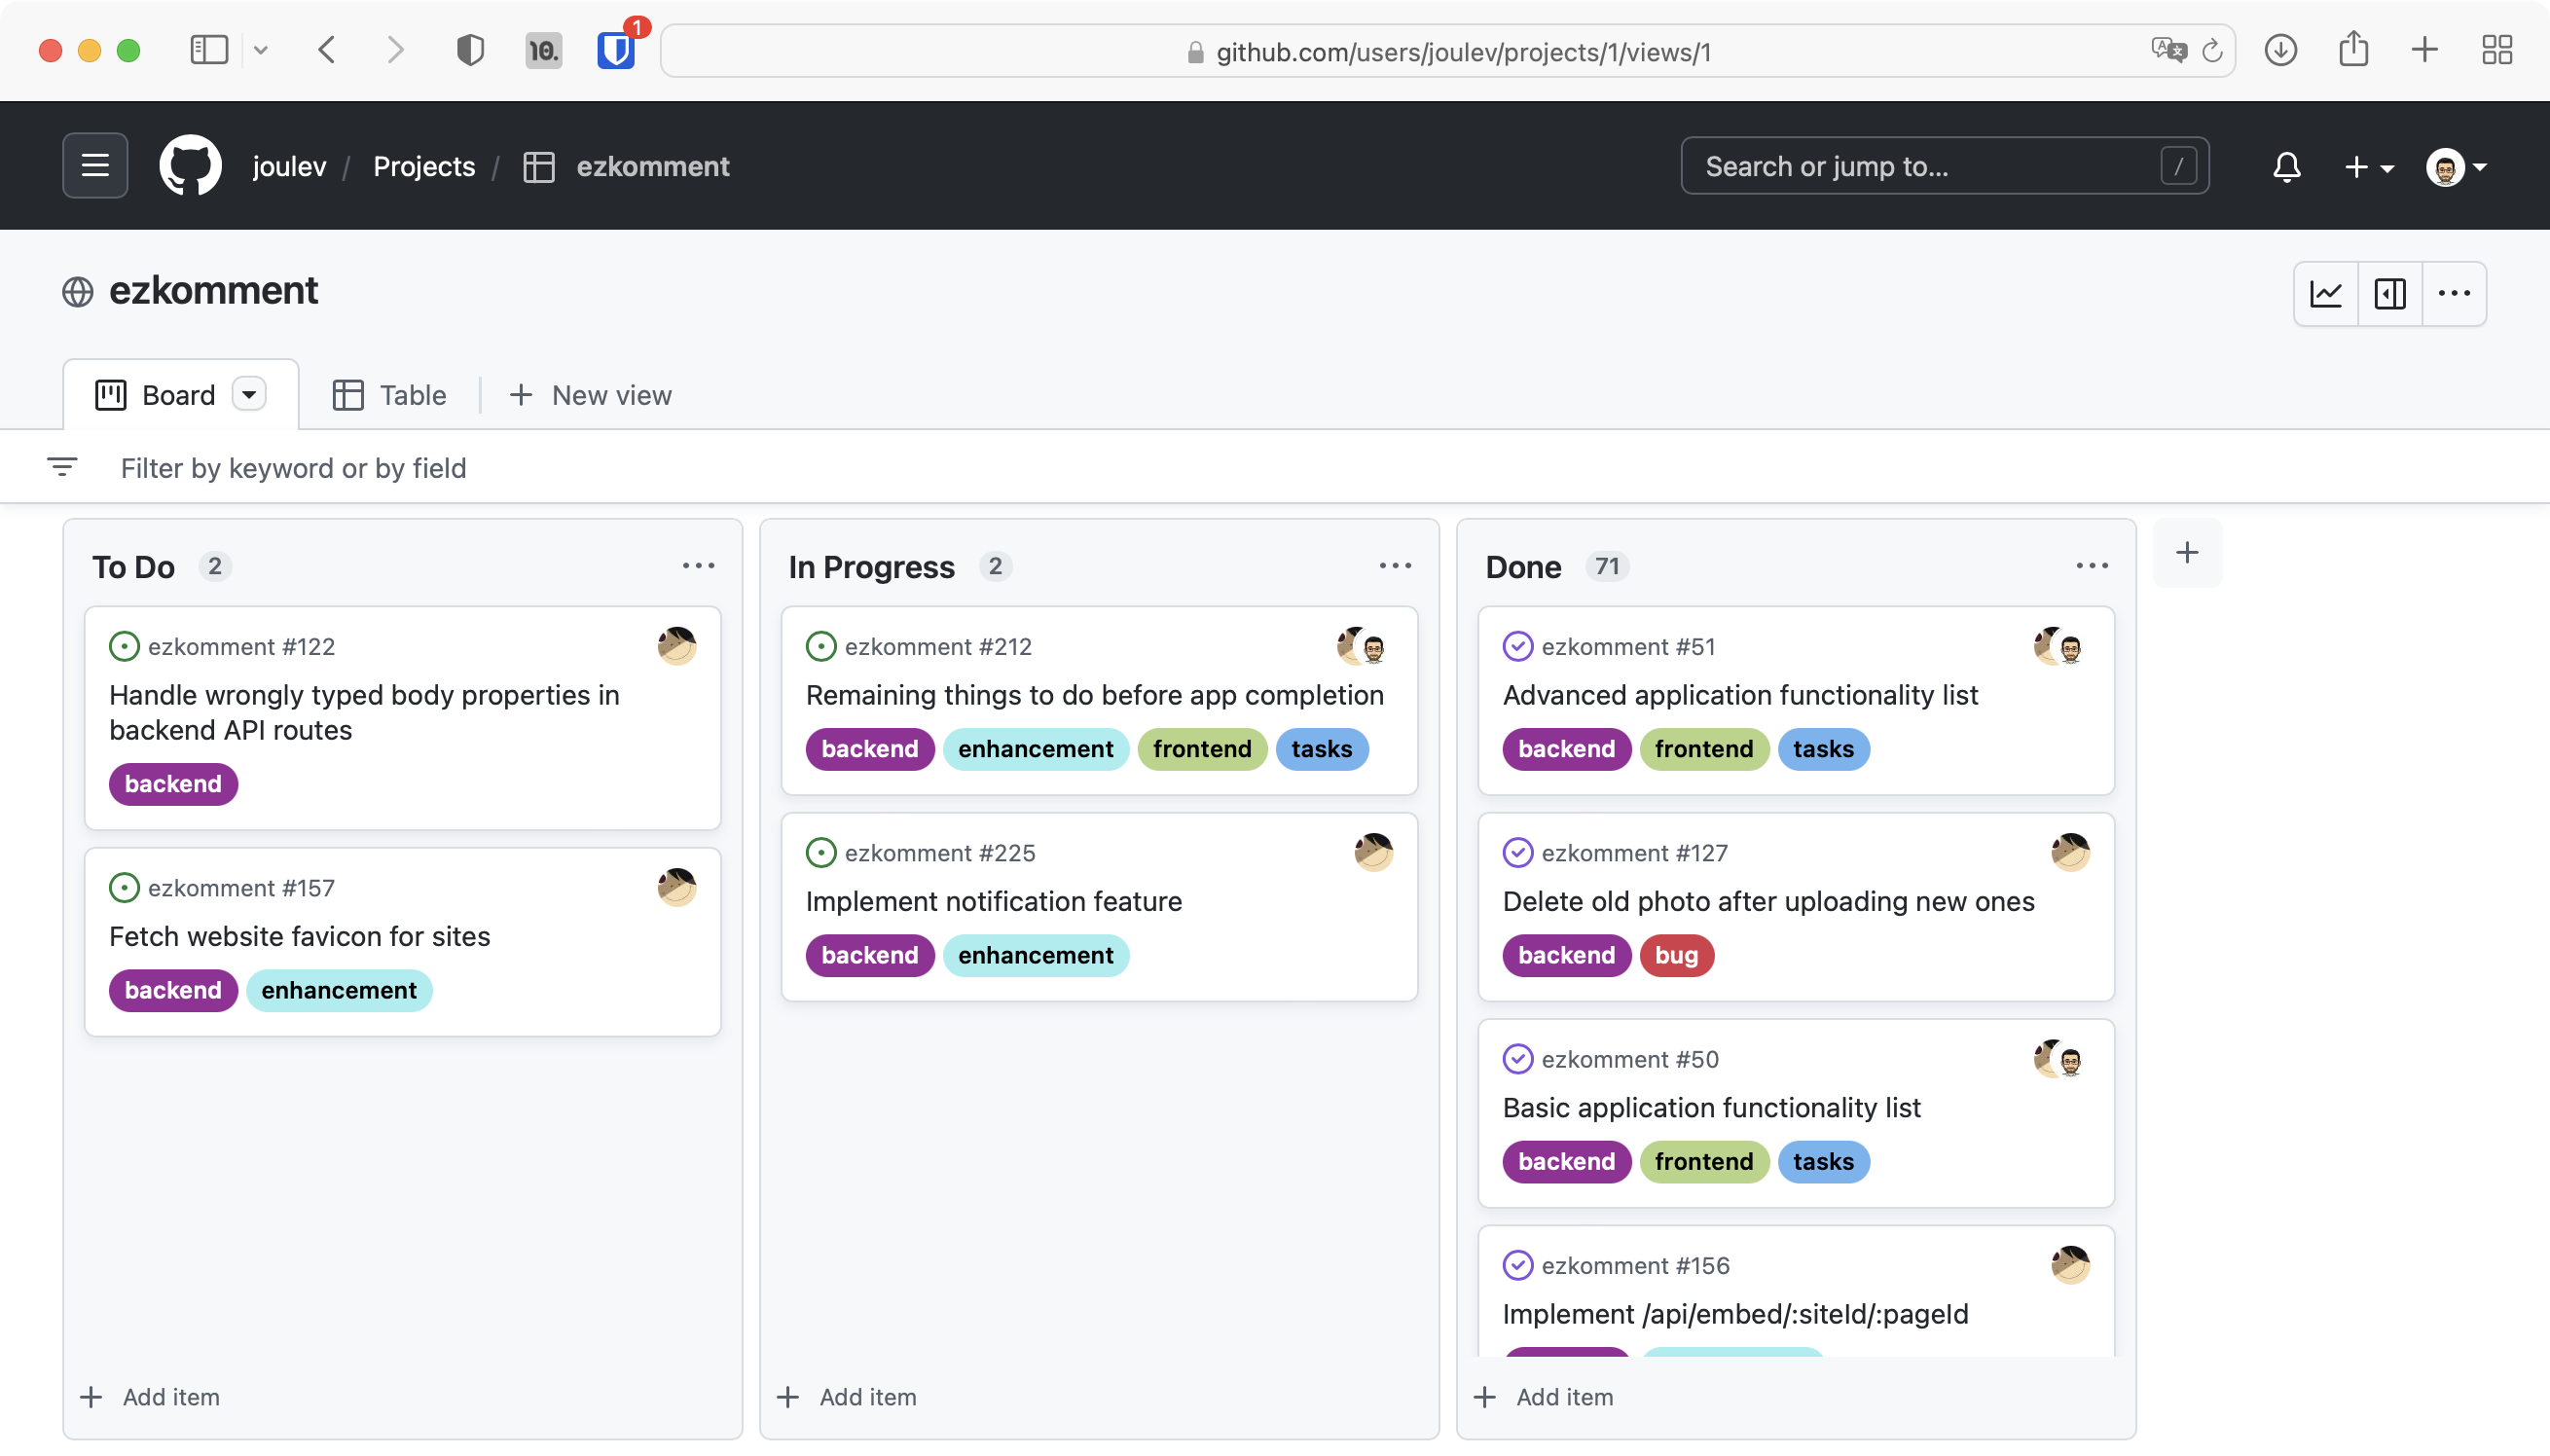 GitHub project board as of 5 August 2022